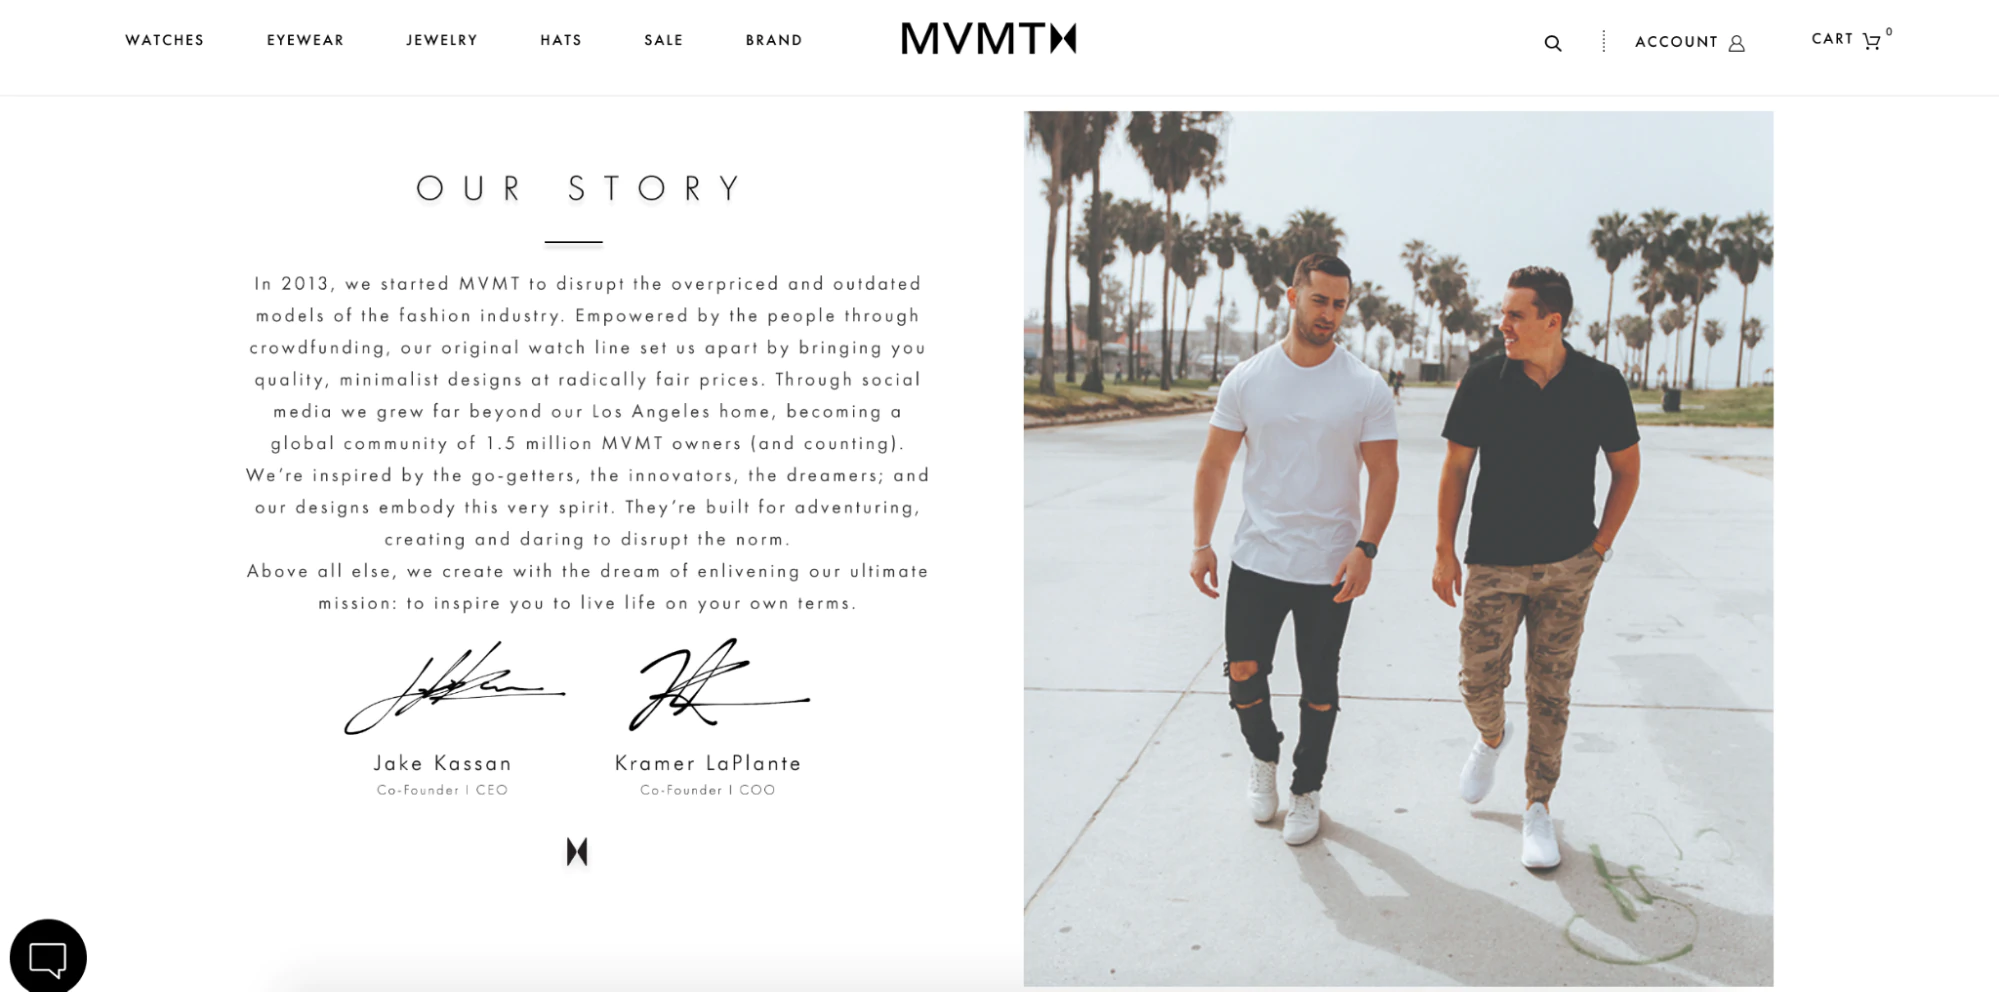 MVMT About Us Page